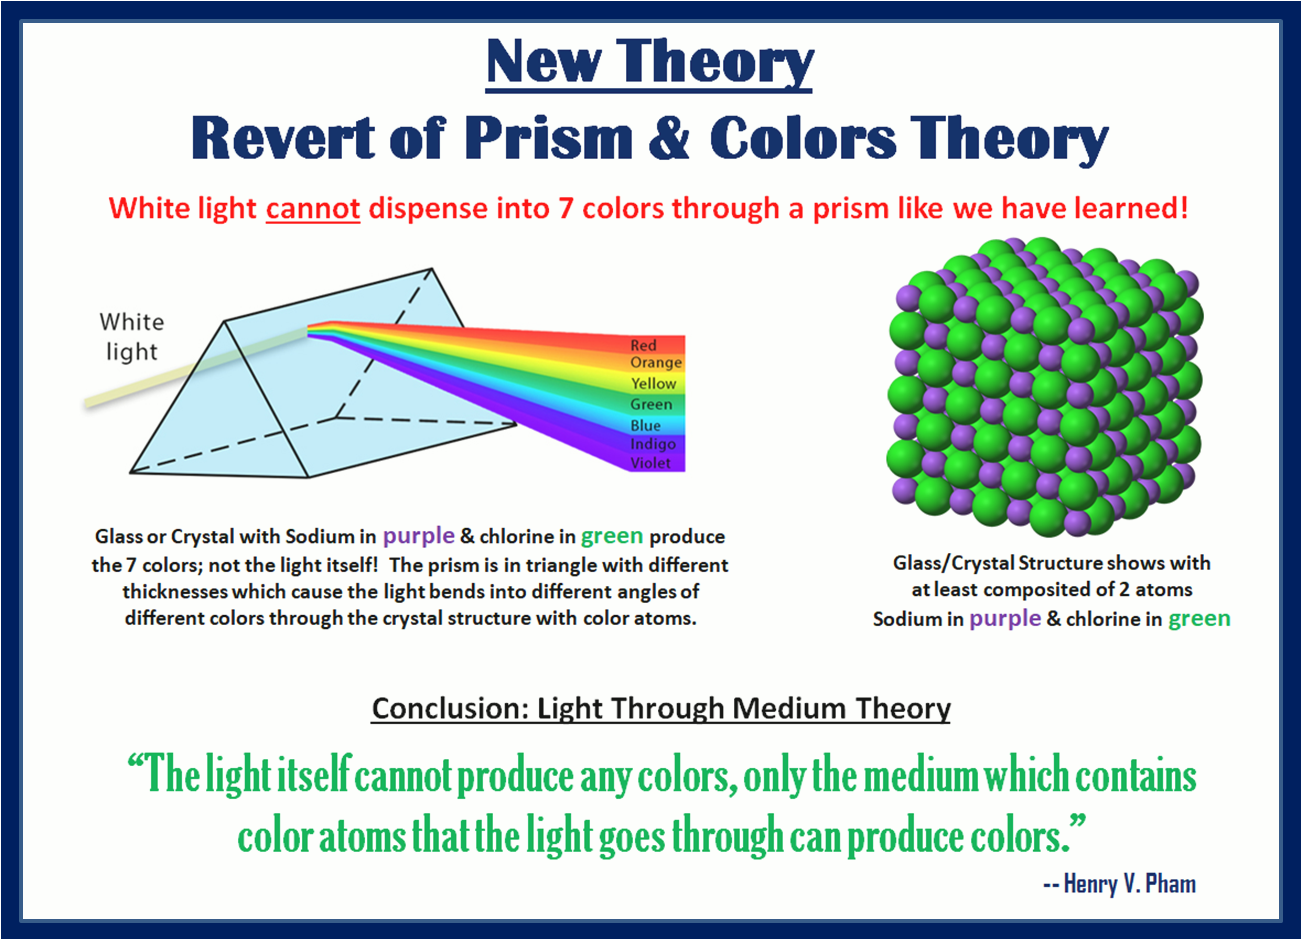 NEW THEORY: The light through prism